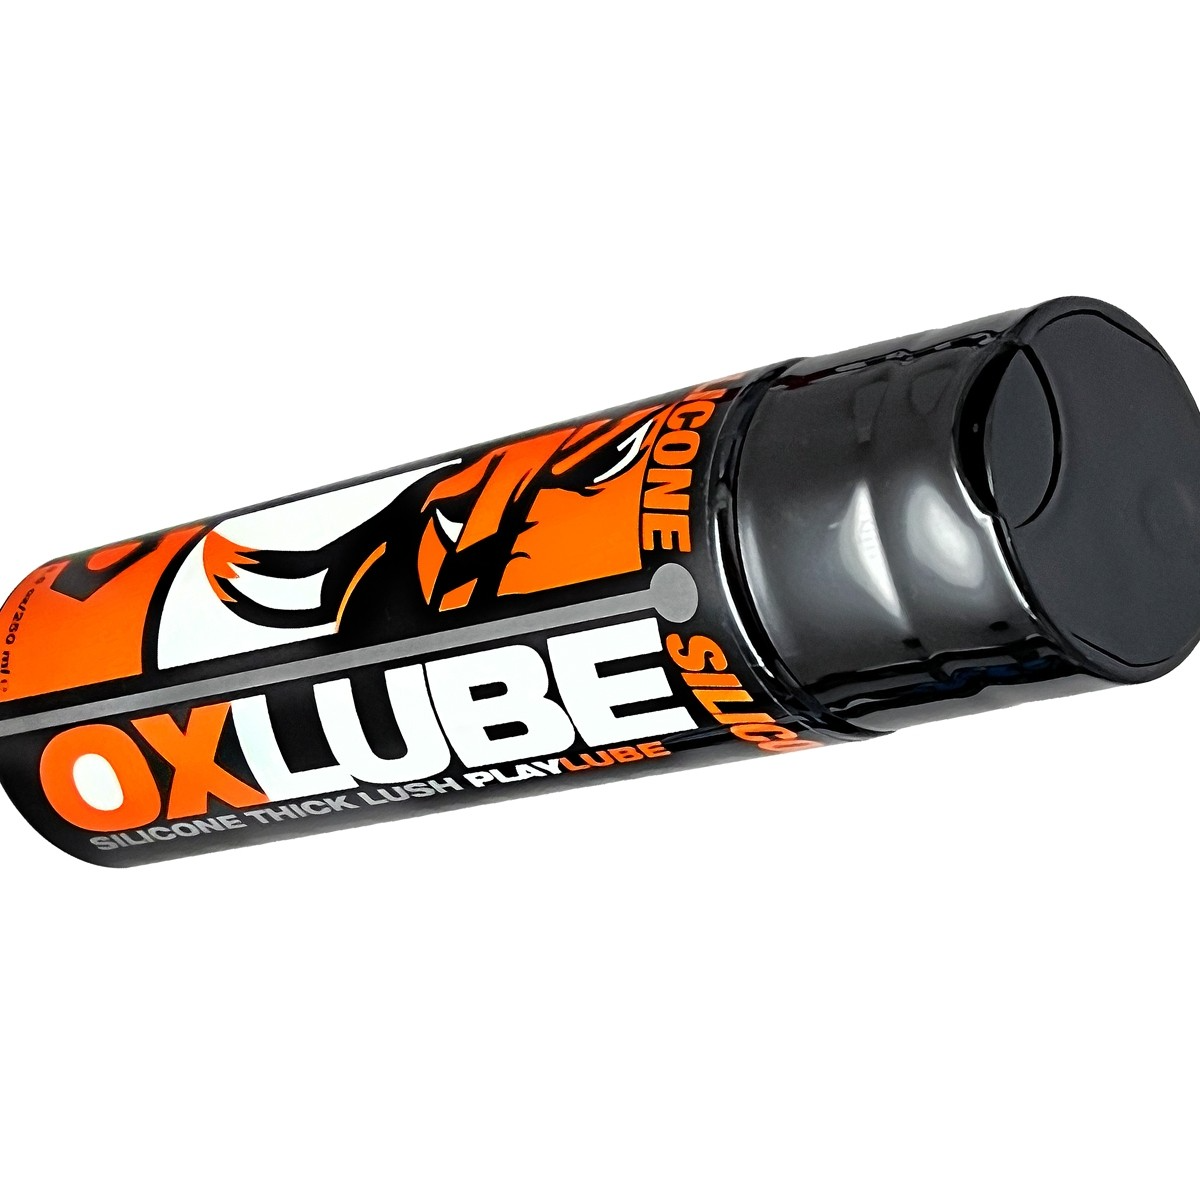 THICK Silicone, OXLube, 4.4 oz